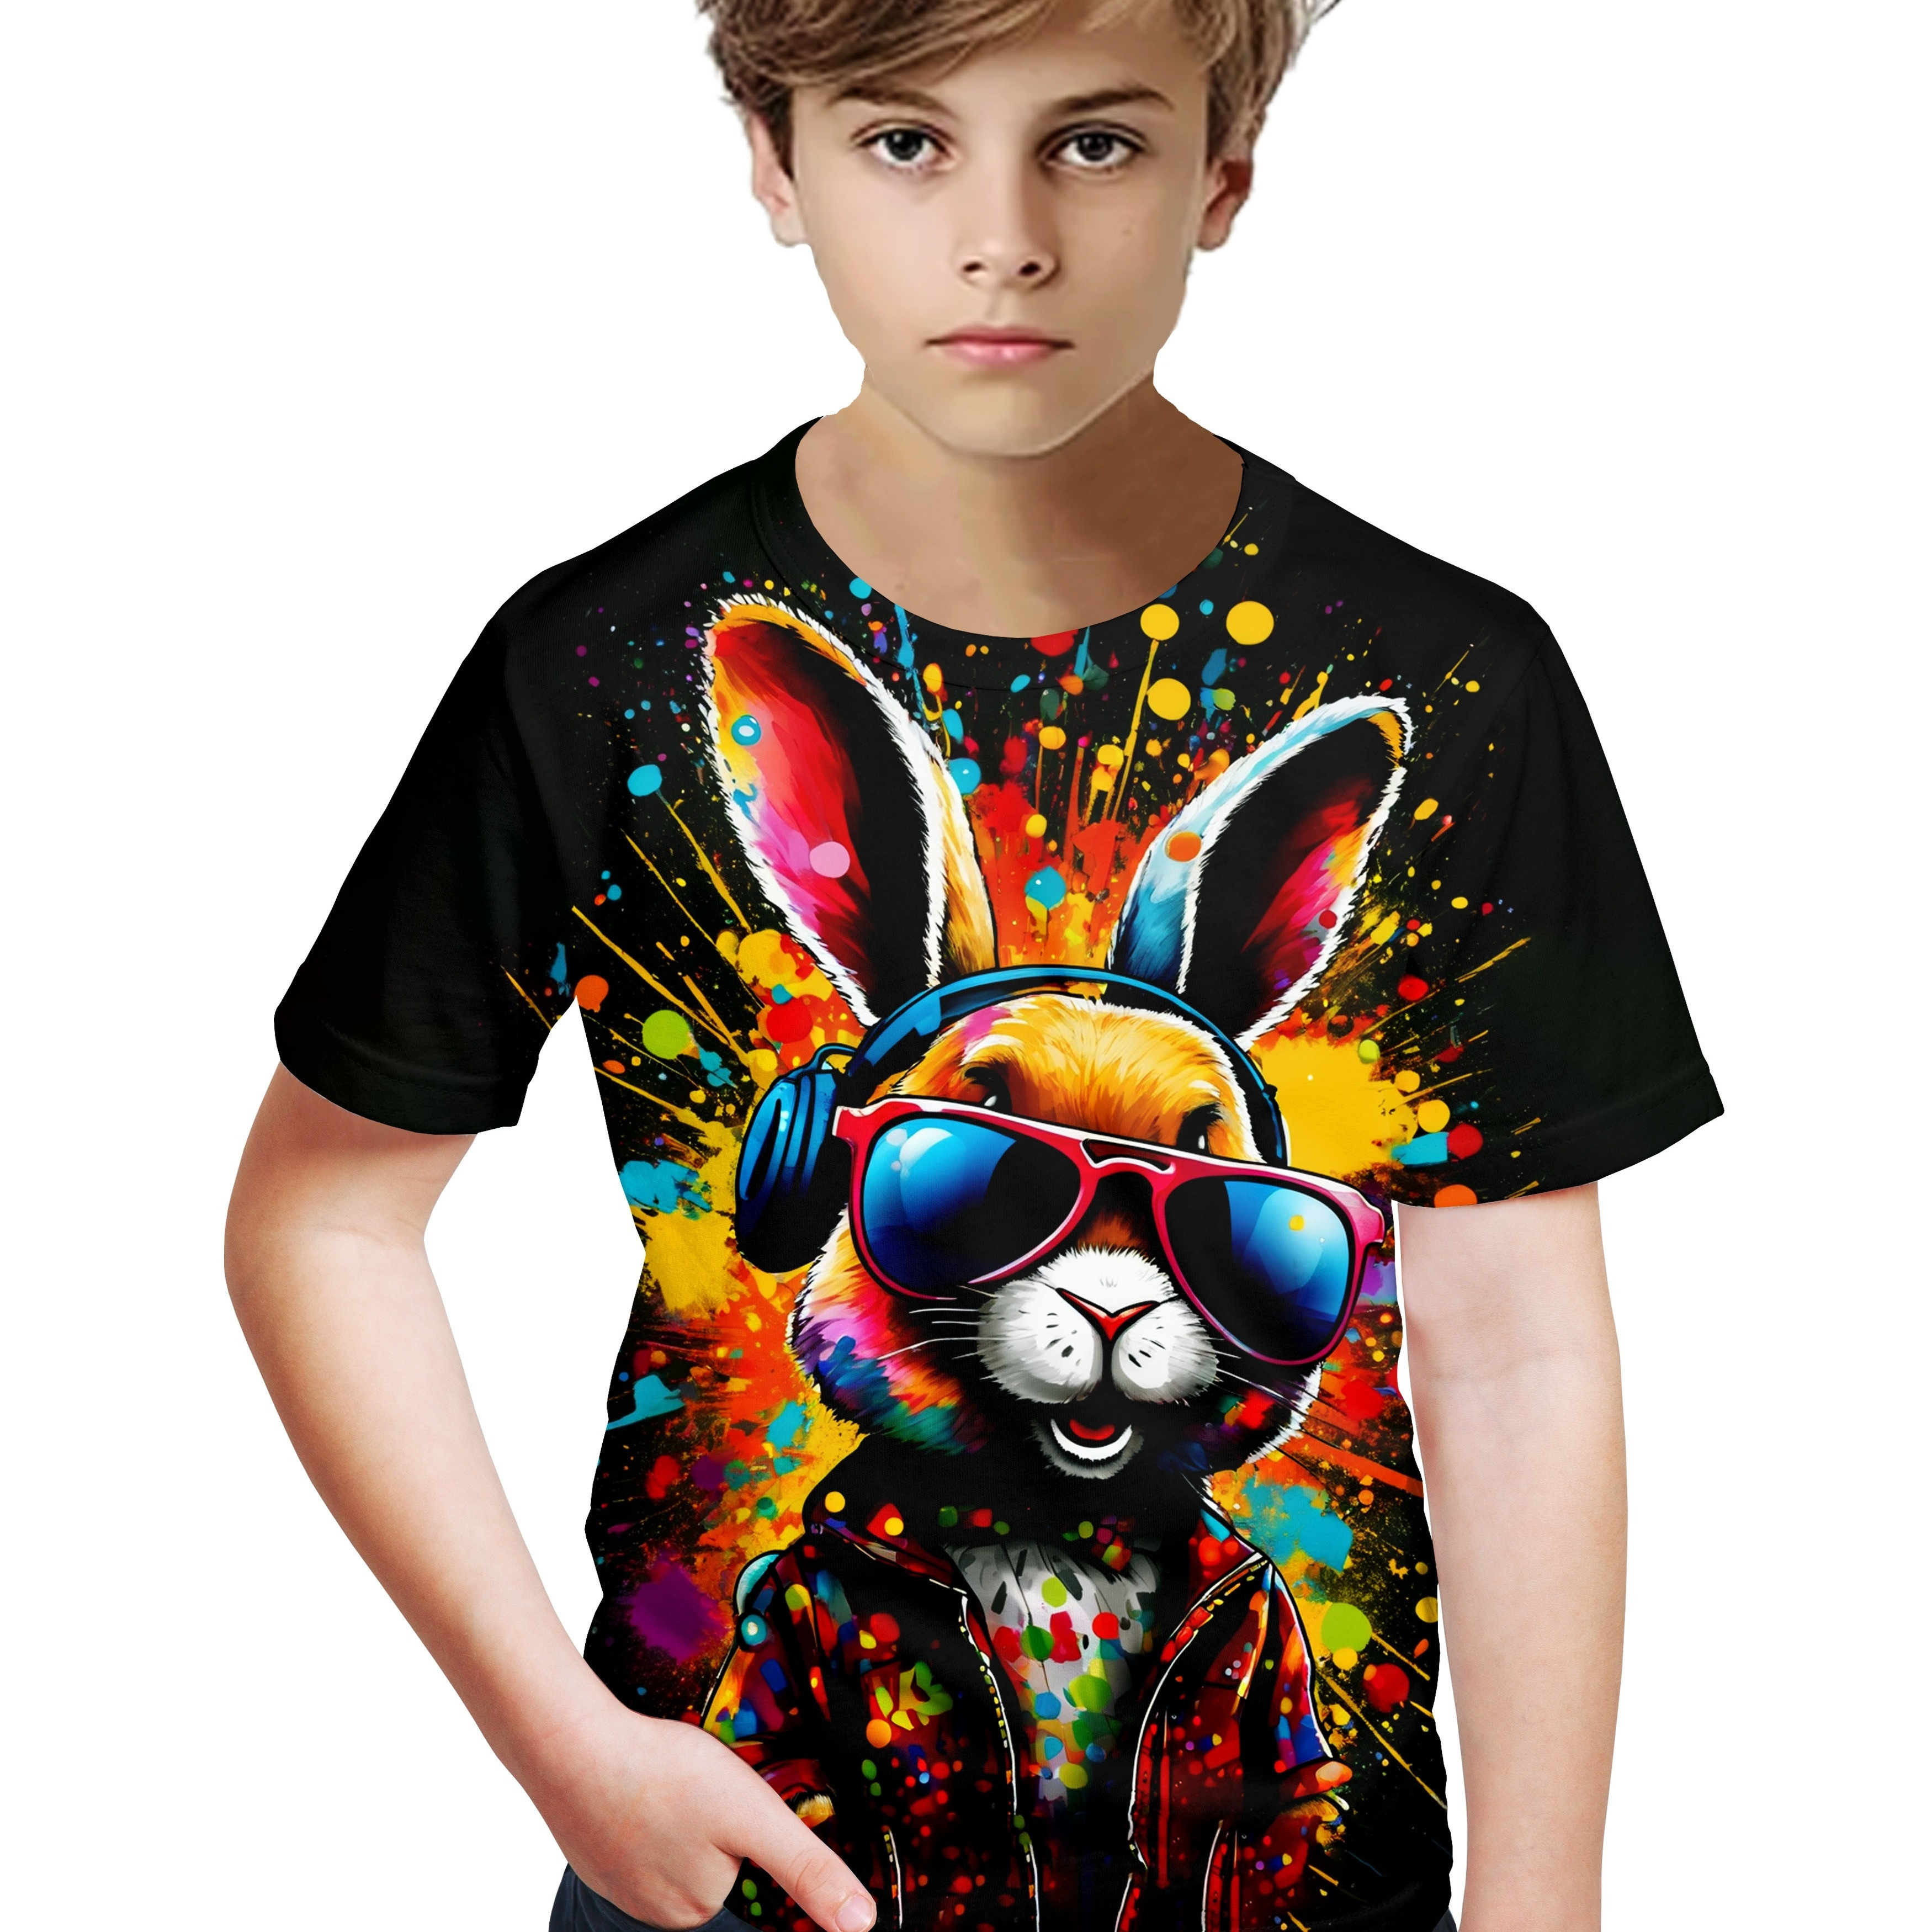 

Trendy Easter Bunny 3d Print Crew Neck T-shirt, Short Sleeve Casual Comfy Summer Tee Tops For Boys